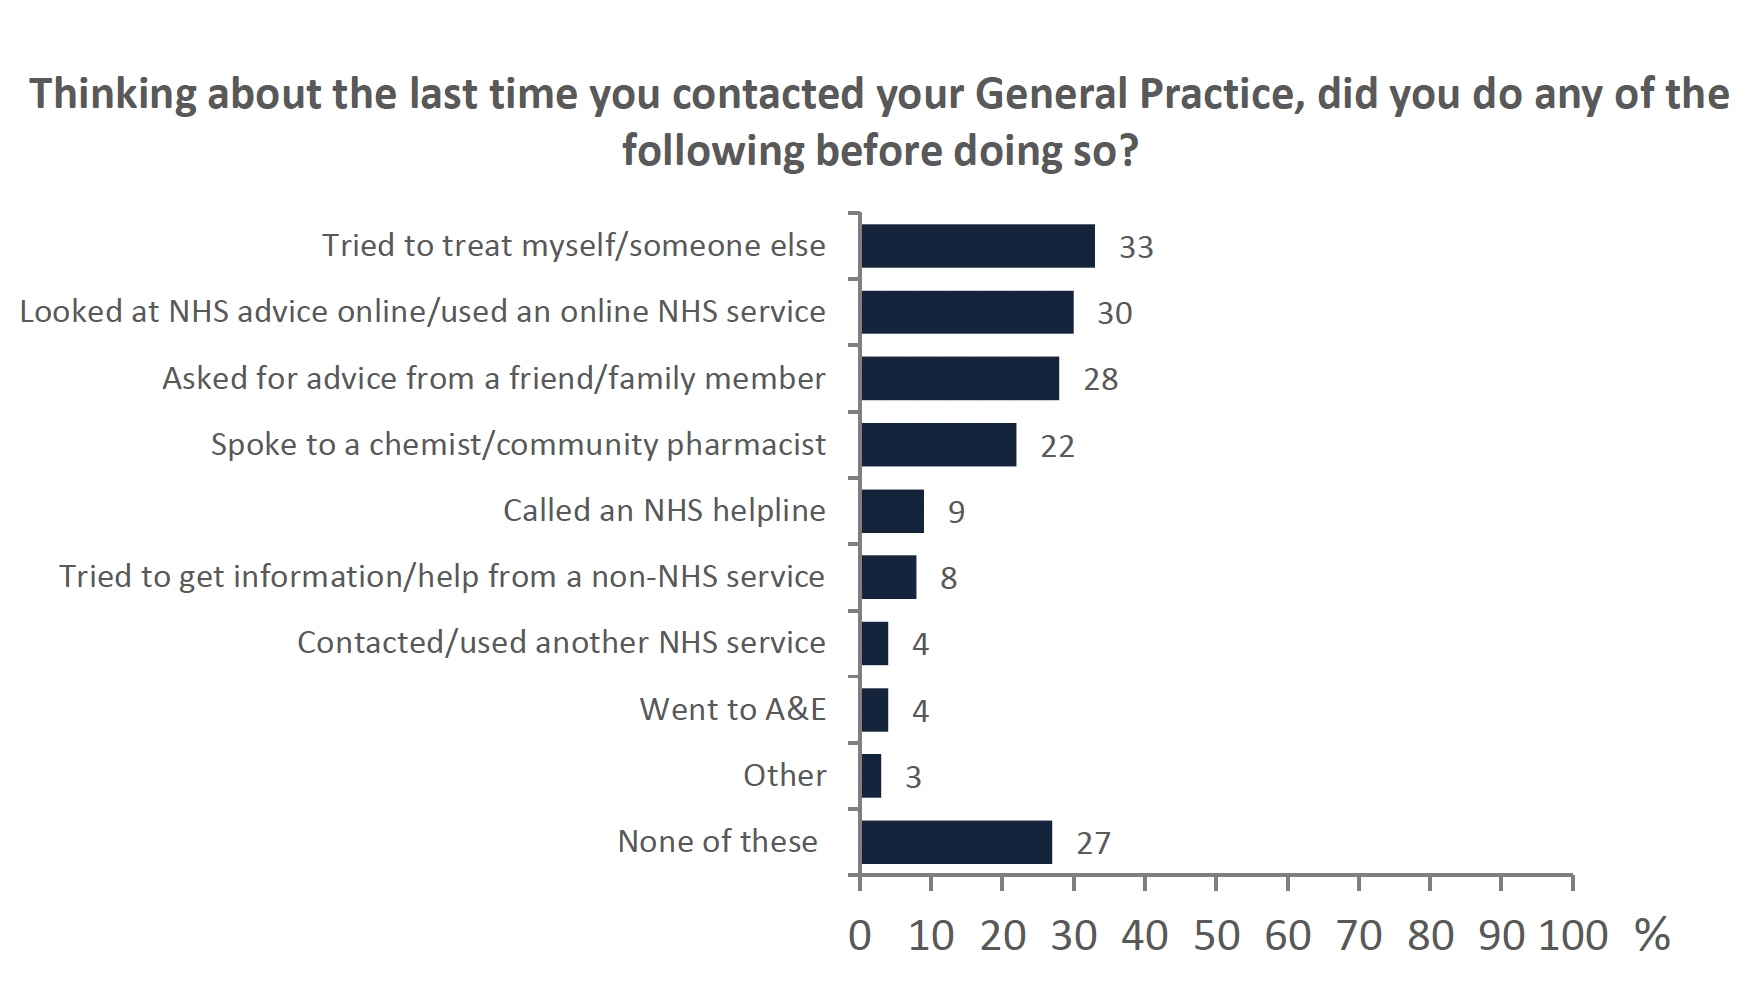 Horizontal bar graph showing what people did prior to contacting general practice last time they did so
Horizontal bar graph that shows what respondents did prior to contacting their General Practice. This data is based on respondents who contacted a General Practice in the last 12 months. Respondents could select more than one option. In descending order respondents selected: Tried to treat myself/someone else, Looked at NHS advice online/used an online NHS service, Asked for advice from a friend/family member, None of these (options), Spoke to a chemist/community pharmacist, Called an NHS helpline, Tried to get information/help from a non-NHS service, Contacted/used another NHS service, Went to A&E, Other. 